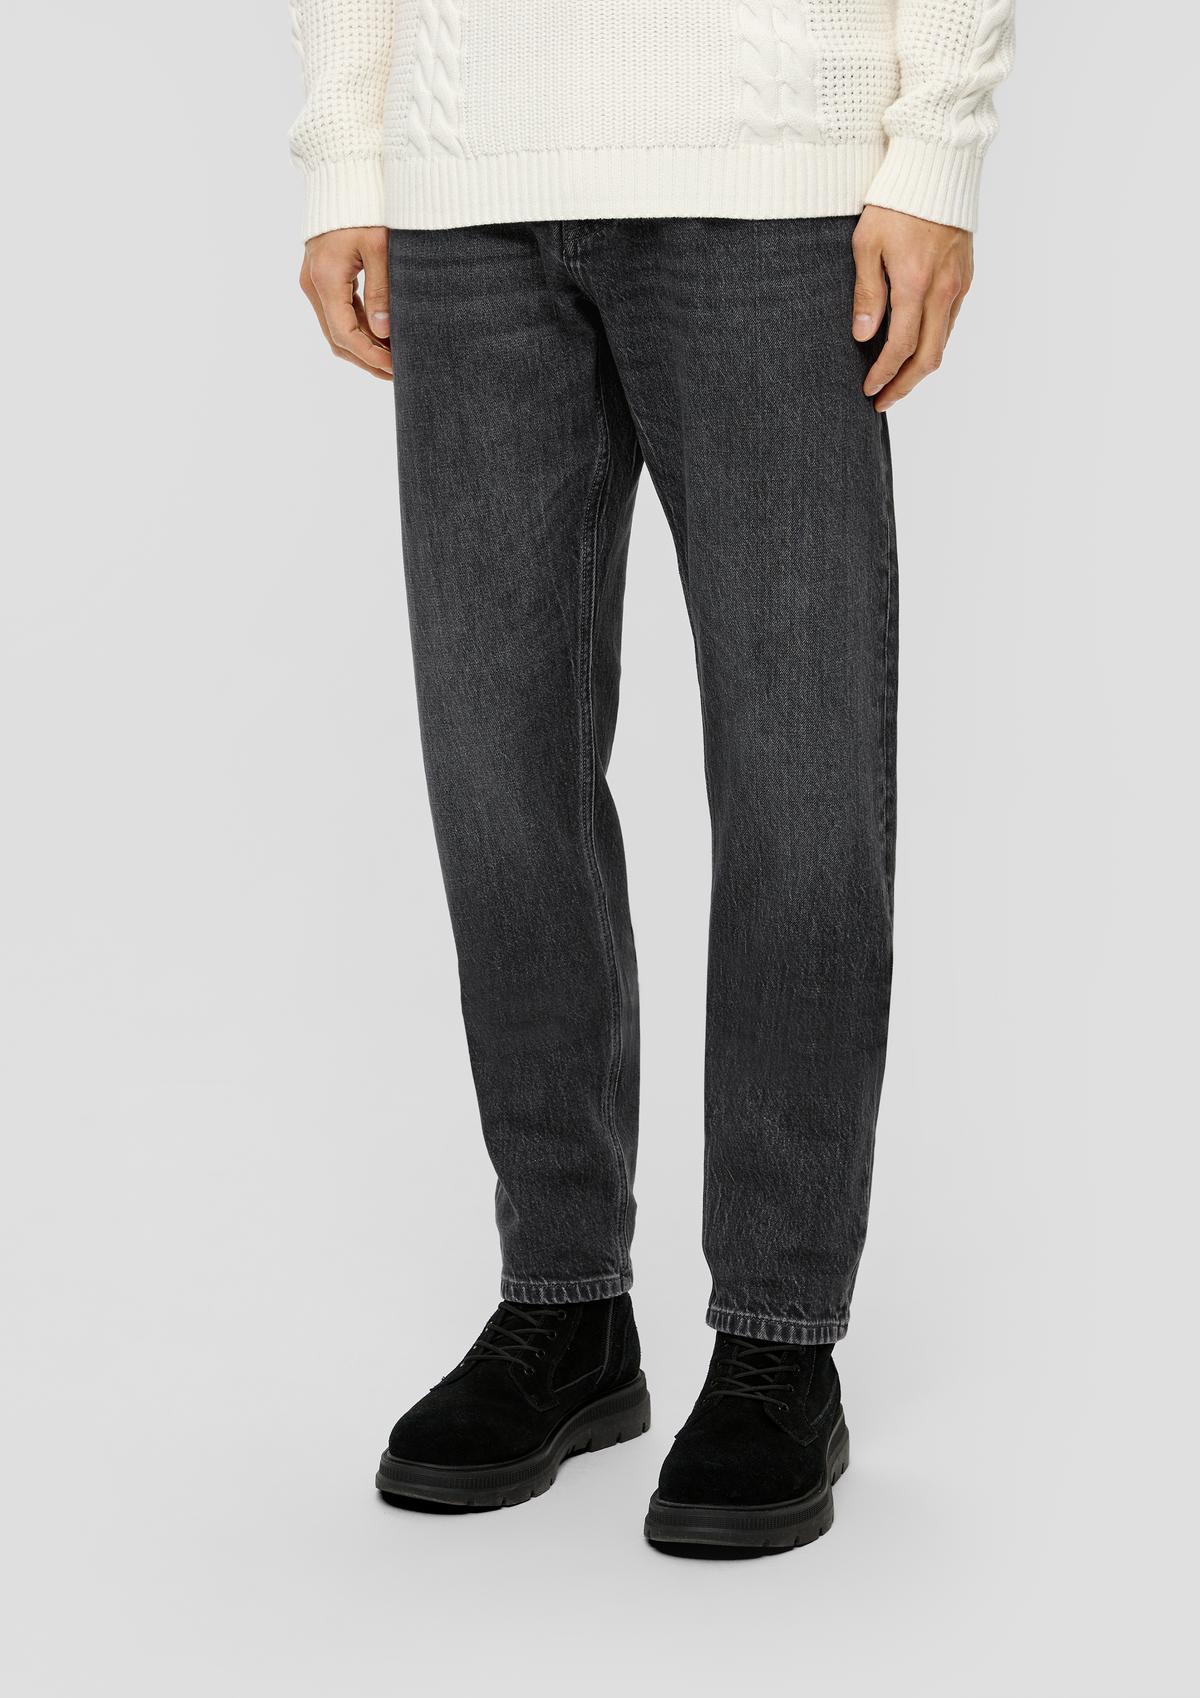 s.Oliver Mauro Jeans / Regular Fit / High Rise / Tapered Leg / Stretch Cotton